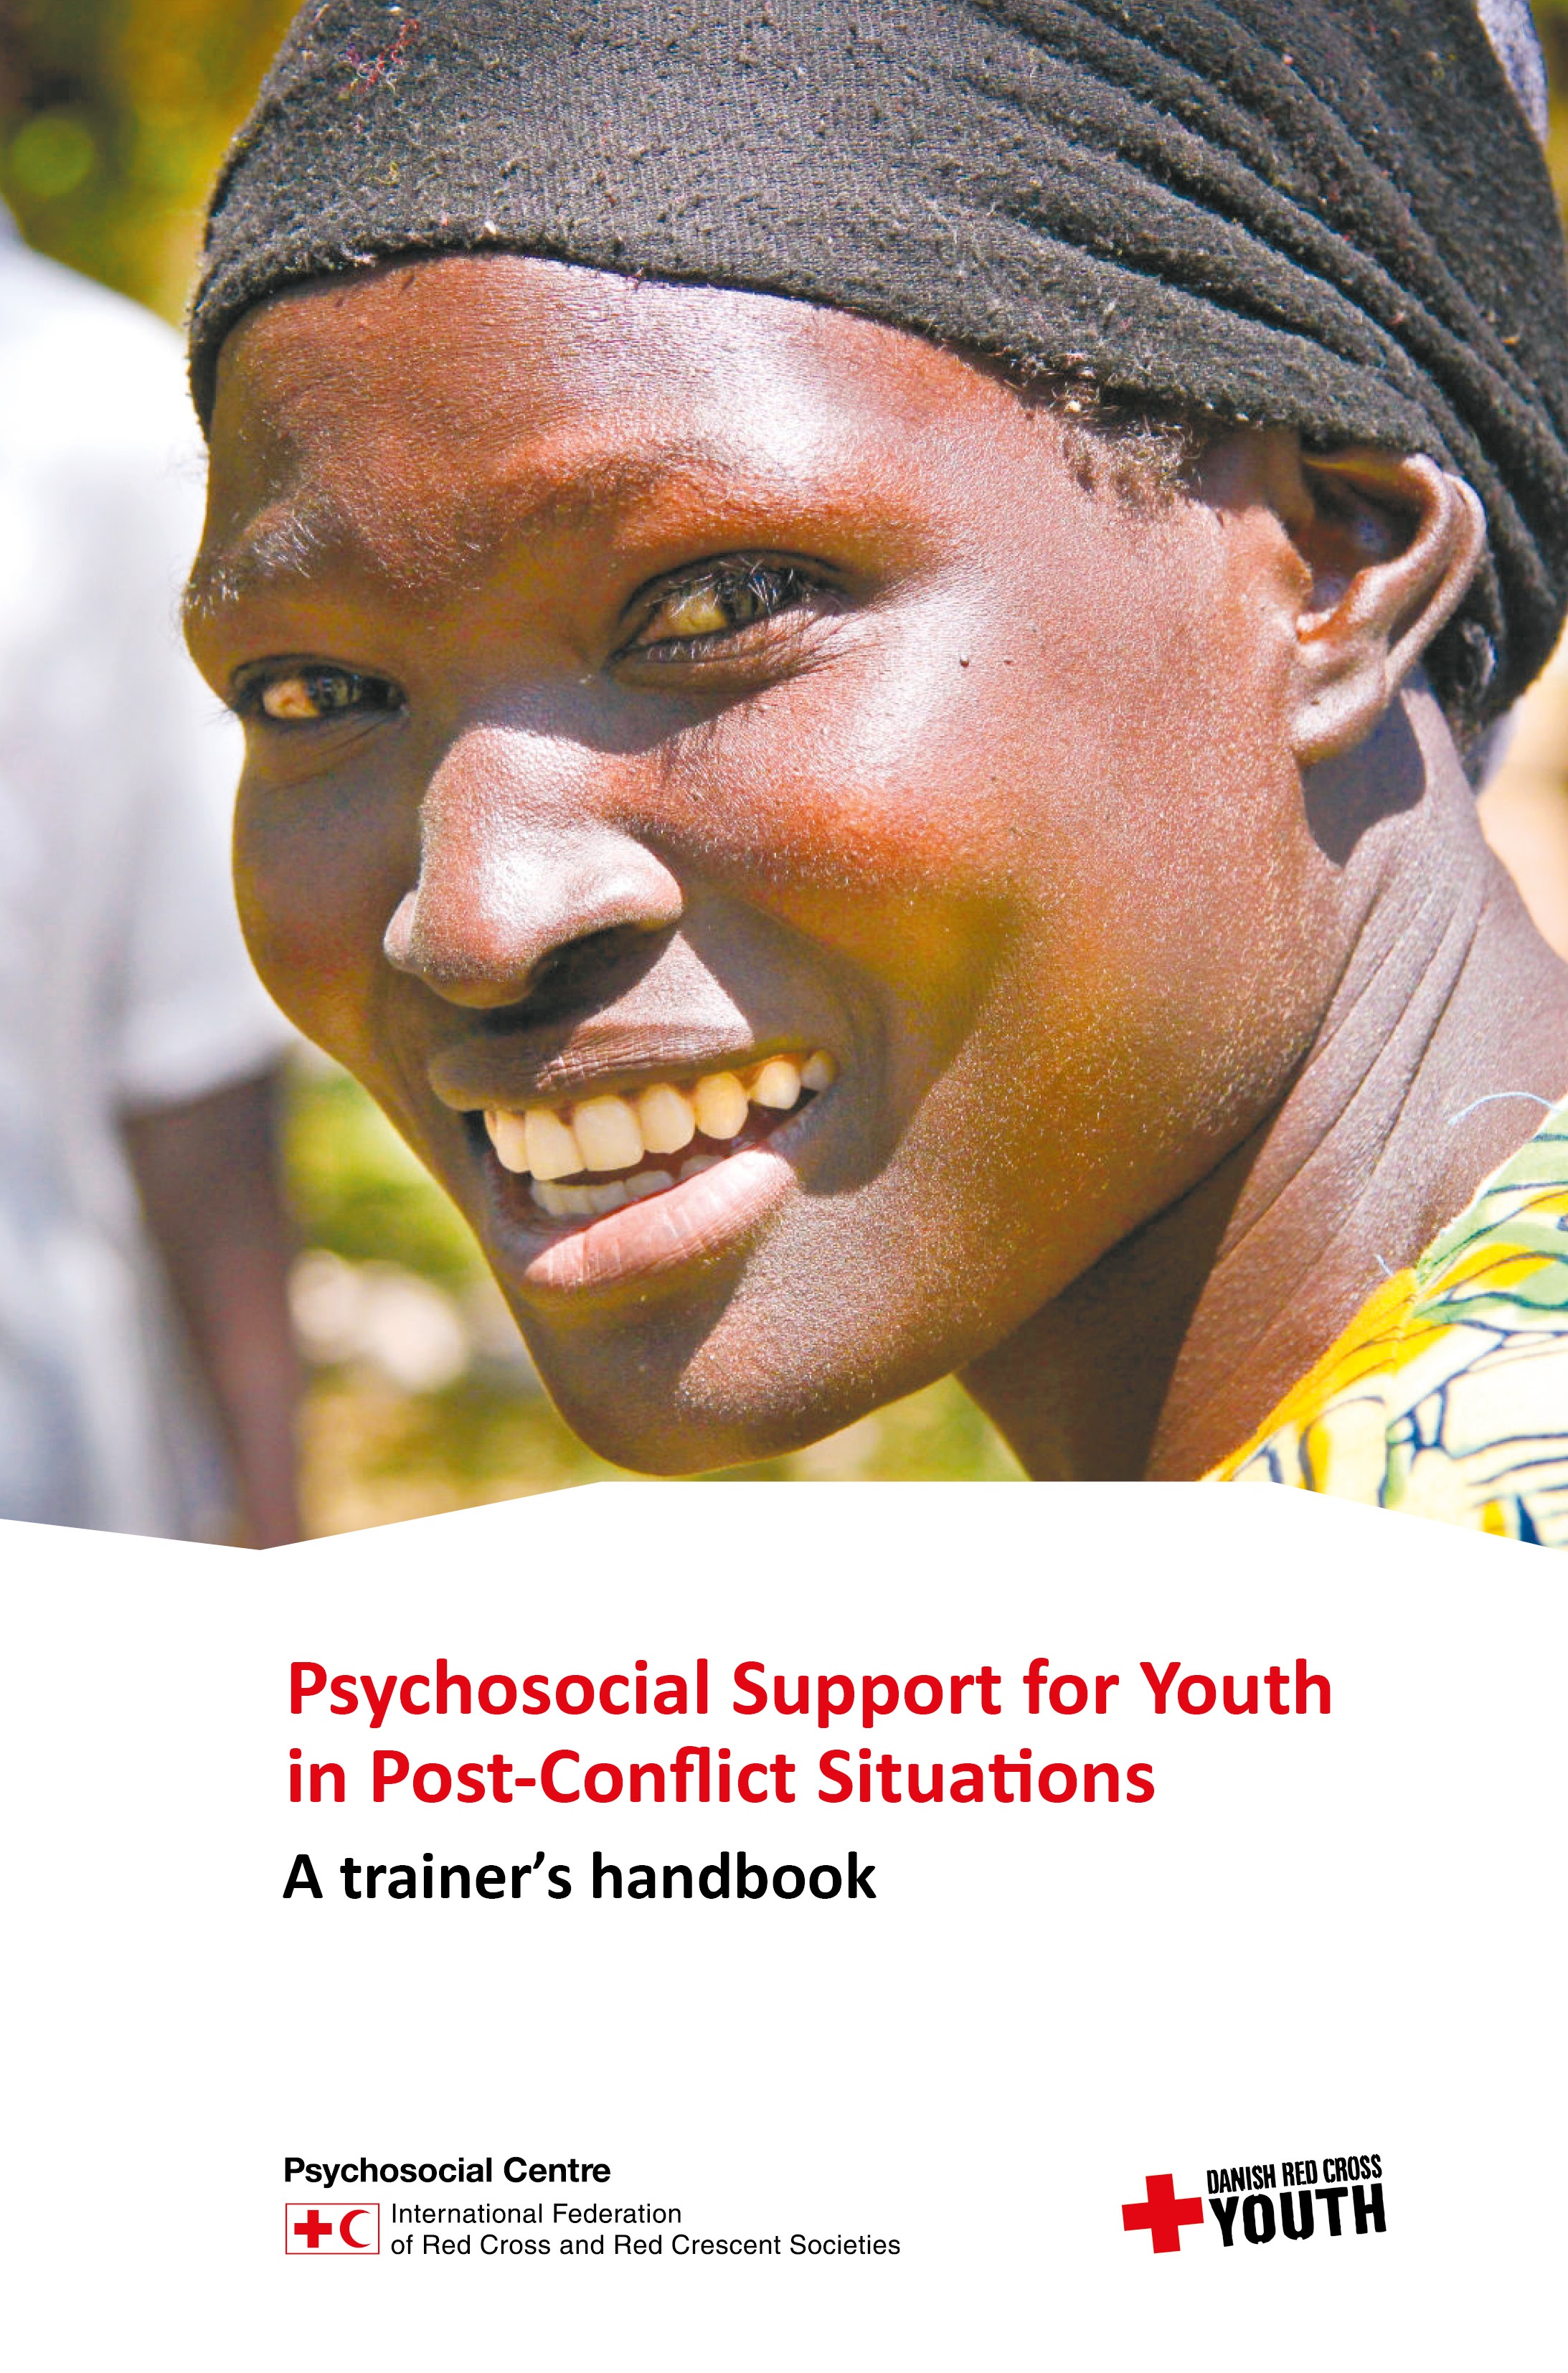 Psychosocial Support for Youth in Post-Conflict A trainer's handbook - Psychosocial Support IFRC